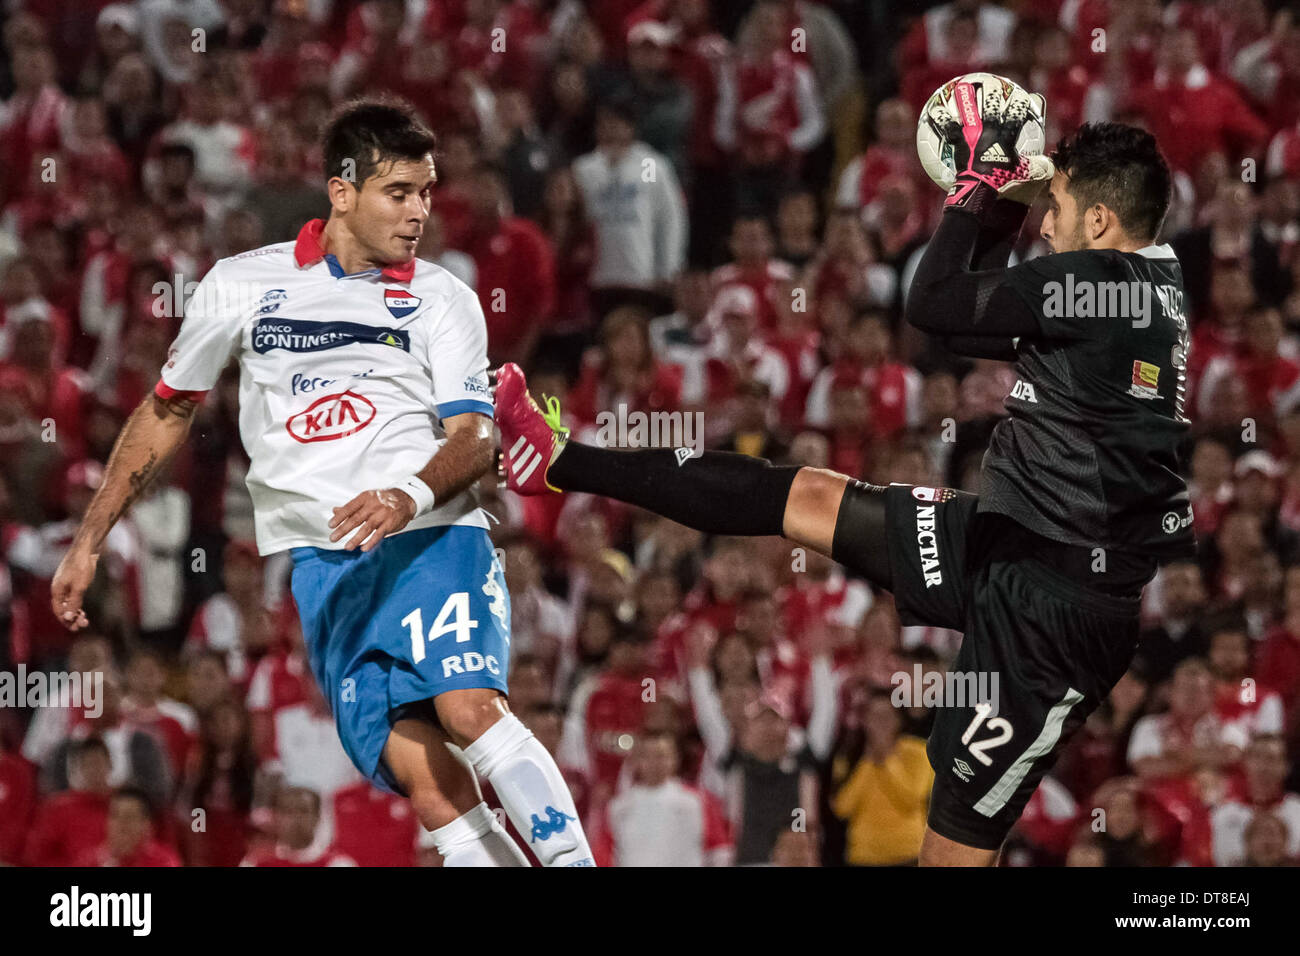 Bogota, Colombia. 11th Feb, 2014. Goalkeeper Camilo Vargas (R) of Colombia's Santa Fe vies for the ball with Marcos Megarejo of Paraguay's Nacional during their Copa Libertadores soccer match at El Campin Stadium, in Bogota City, capital of Colombia, on Feb. 11, 2014. © Jhon Paz/Xinhua/Alamy Live News Stock Photo